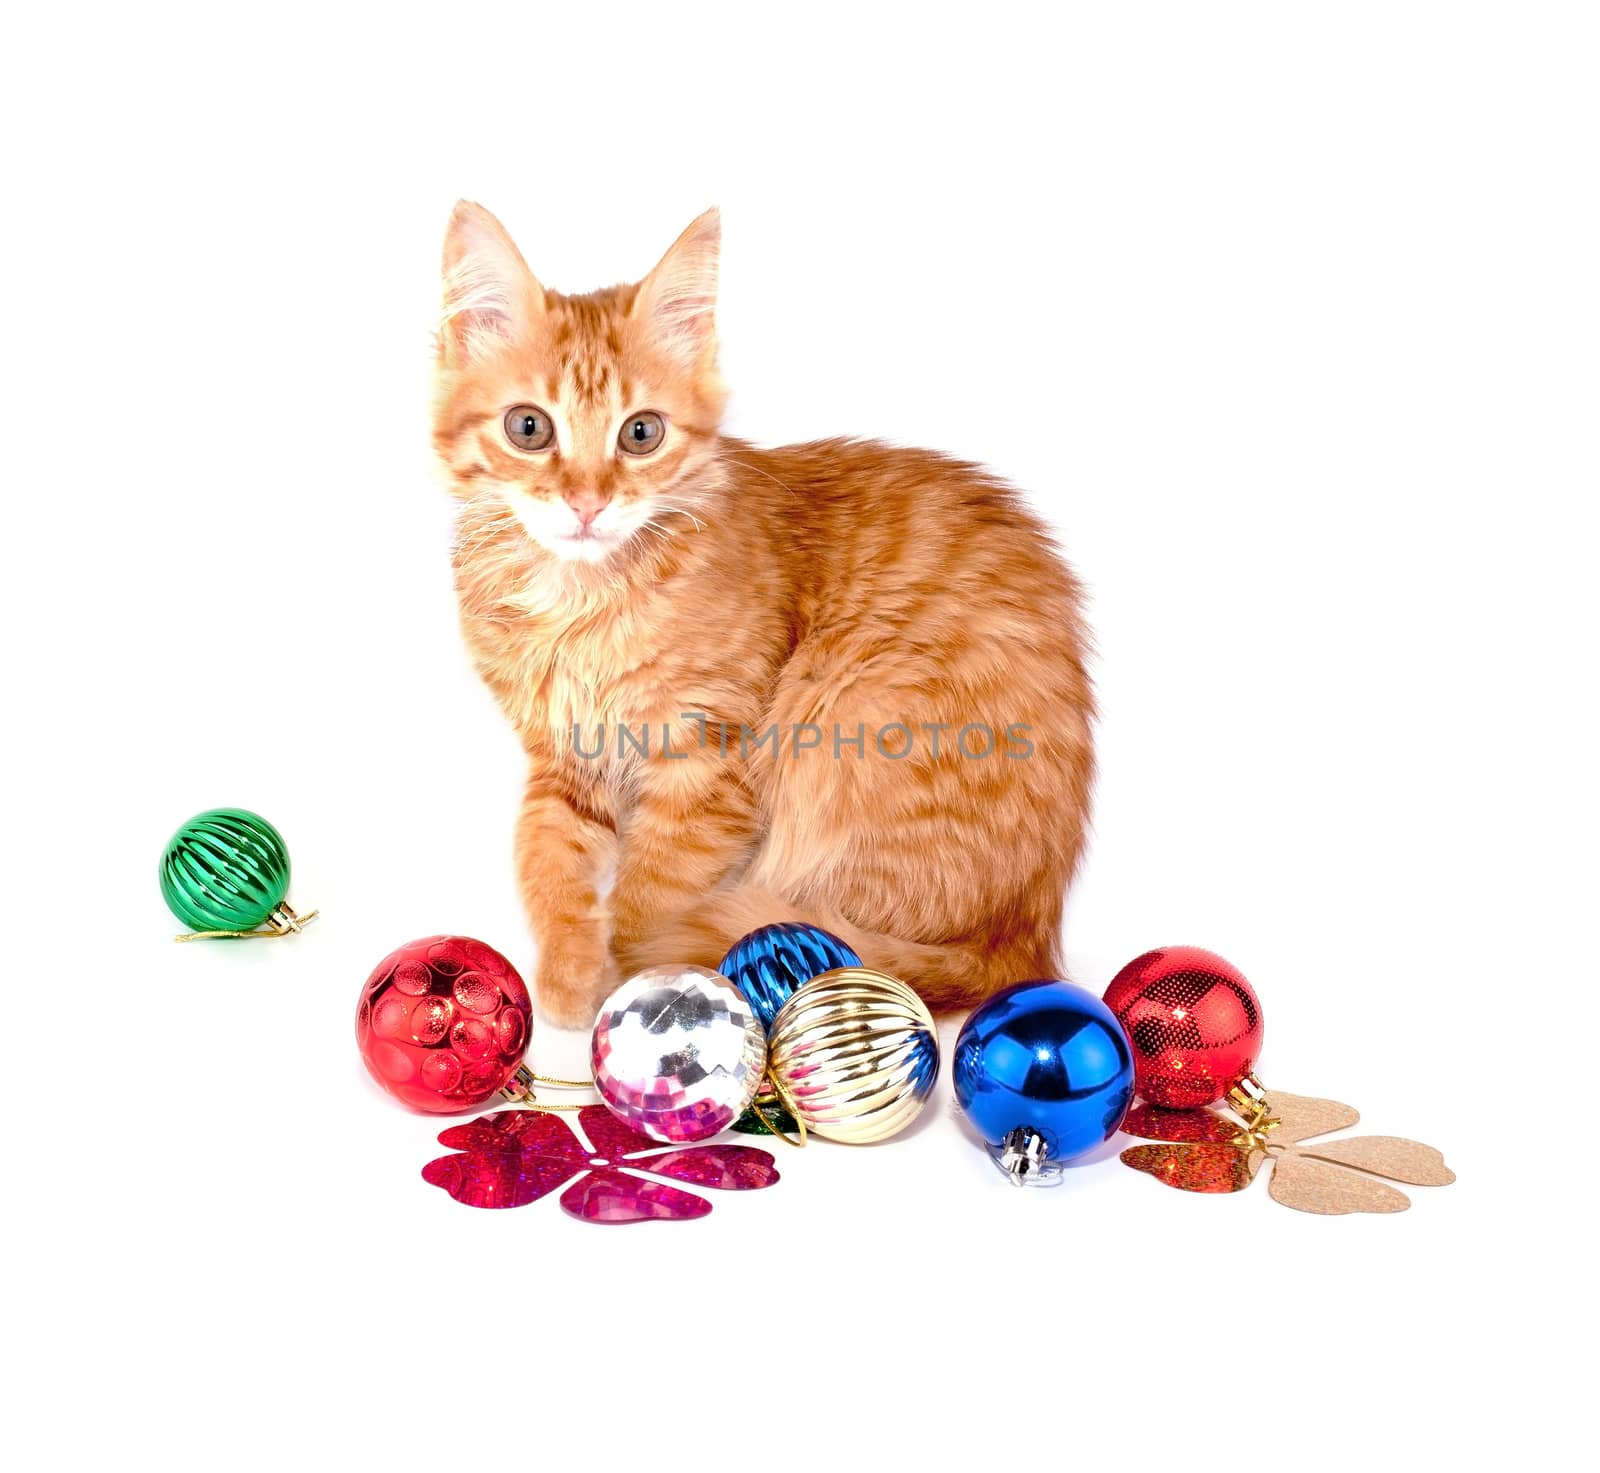 Red Cat with Christmas balls by Krakatuk